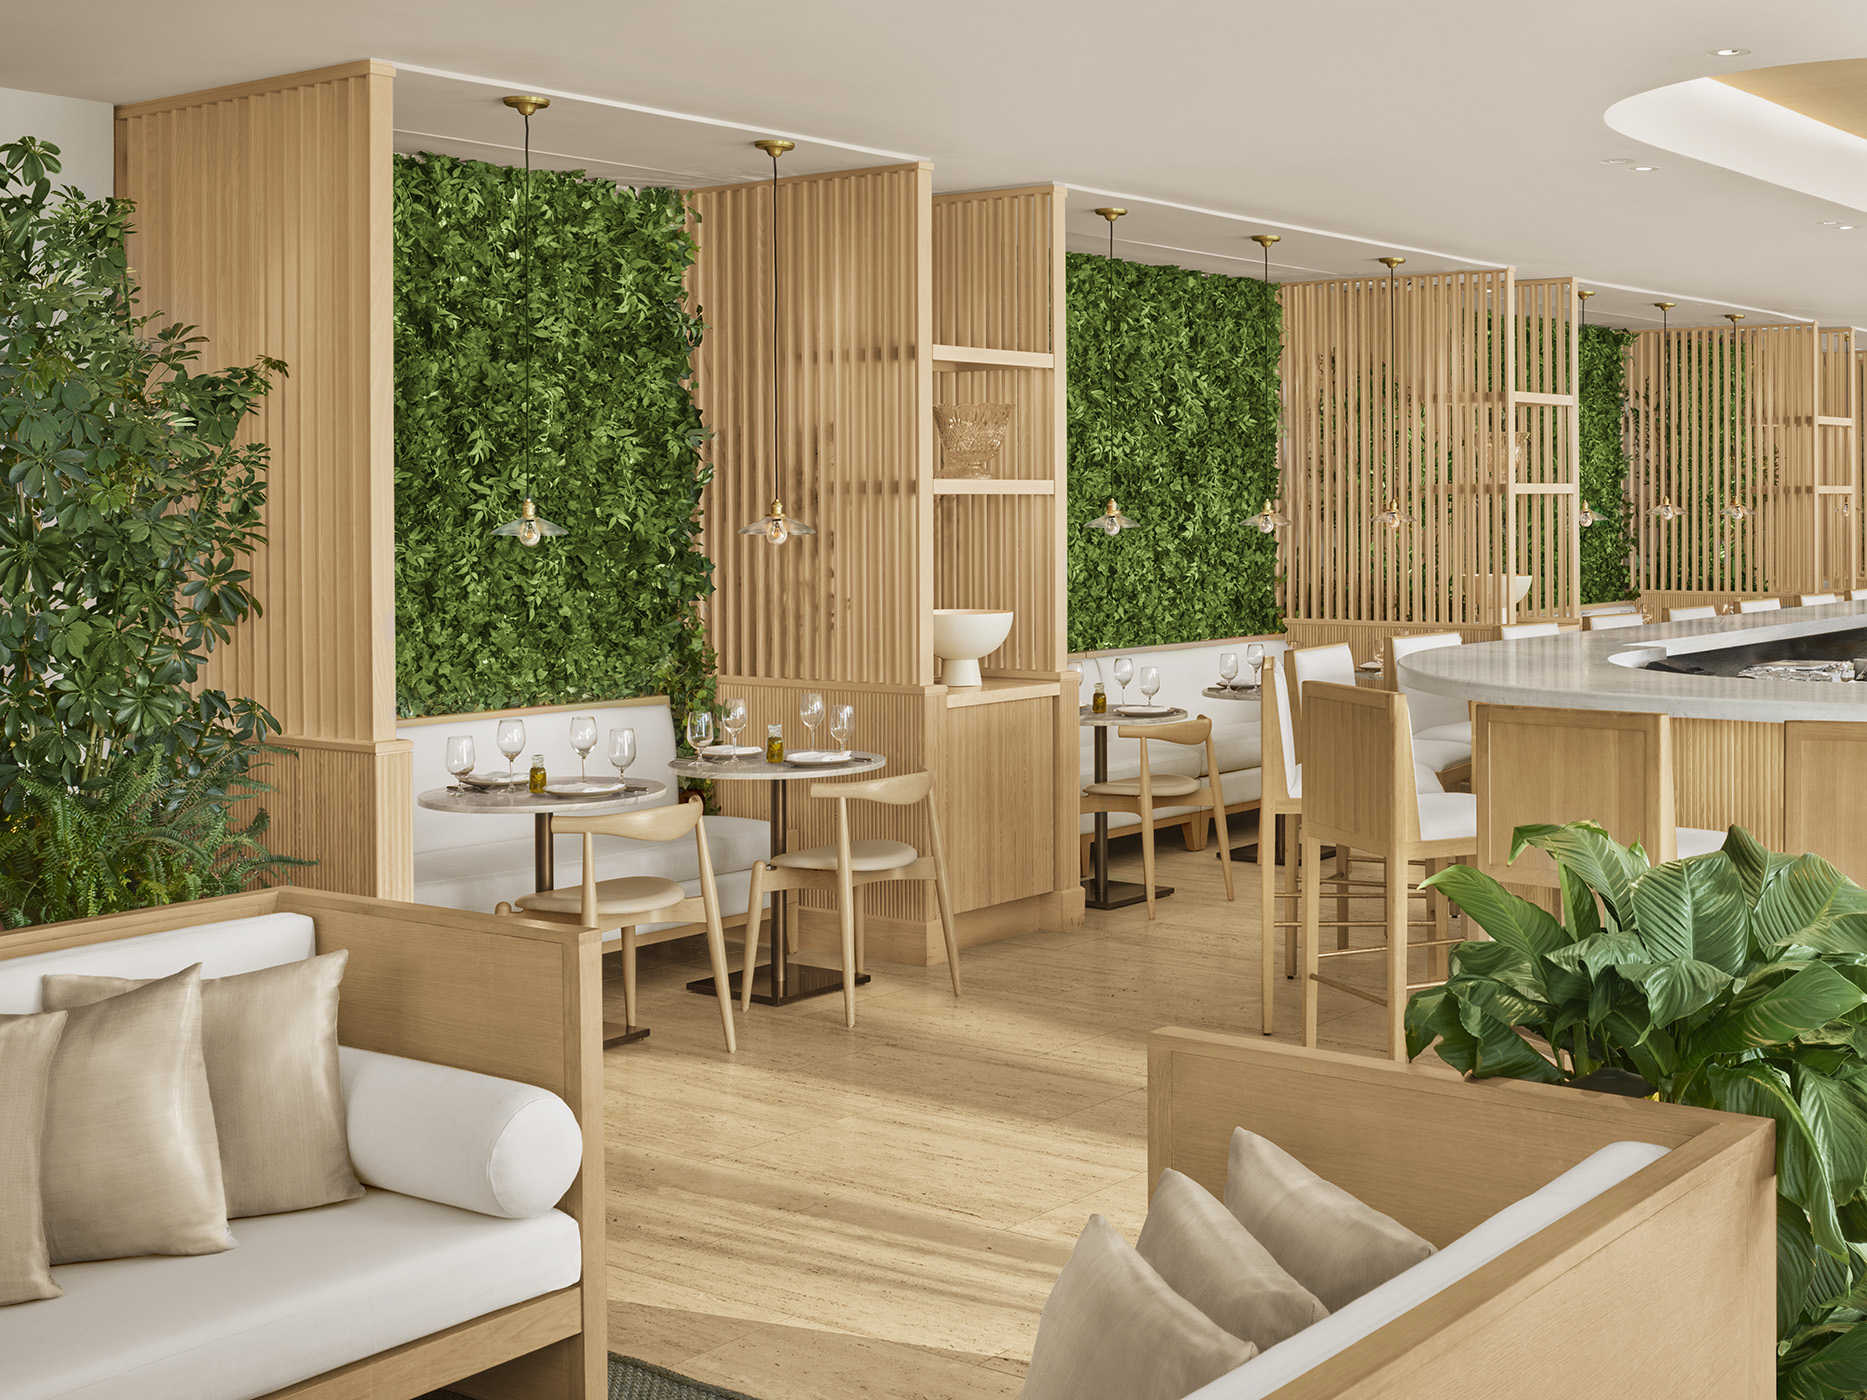 Restaurant designed with light wood and tropical flora